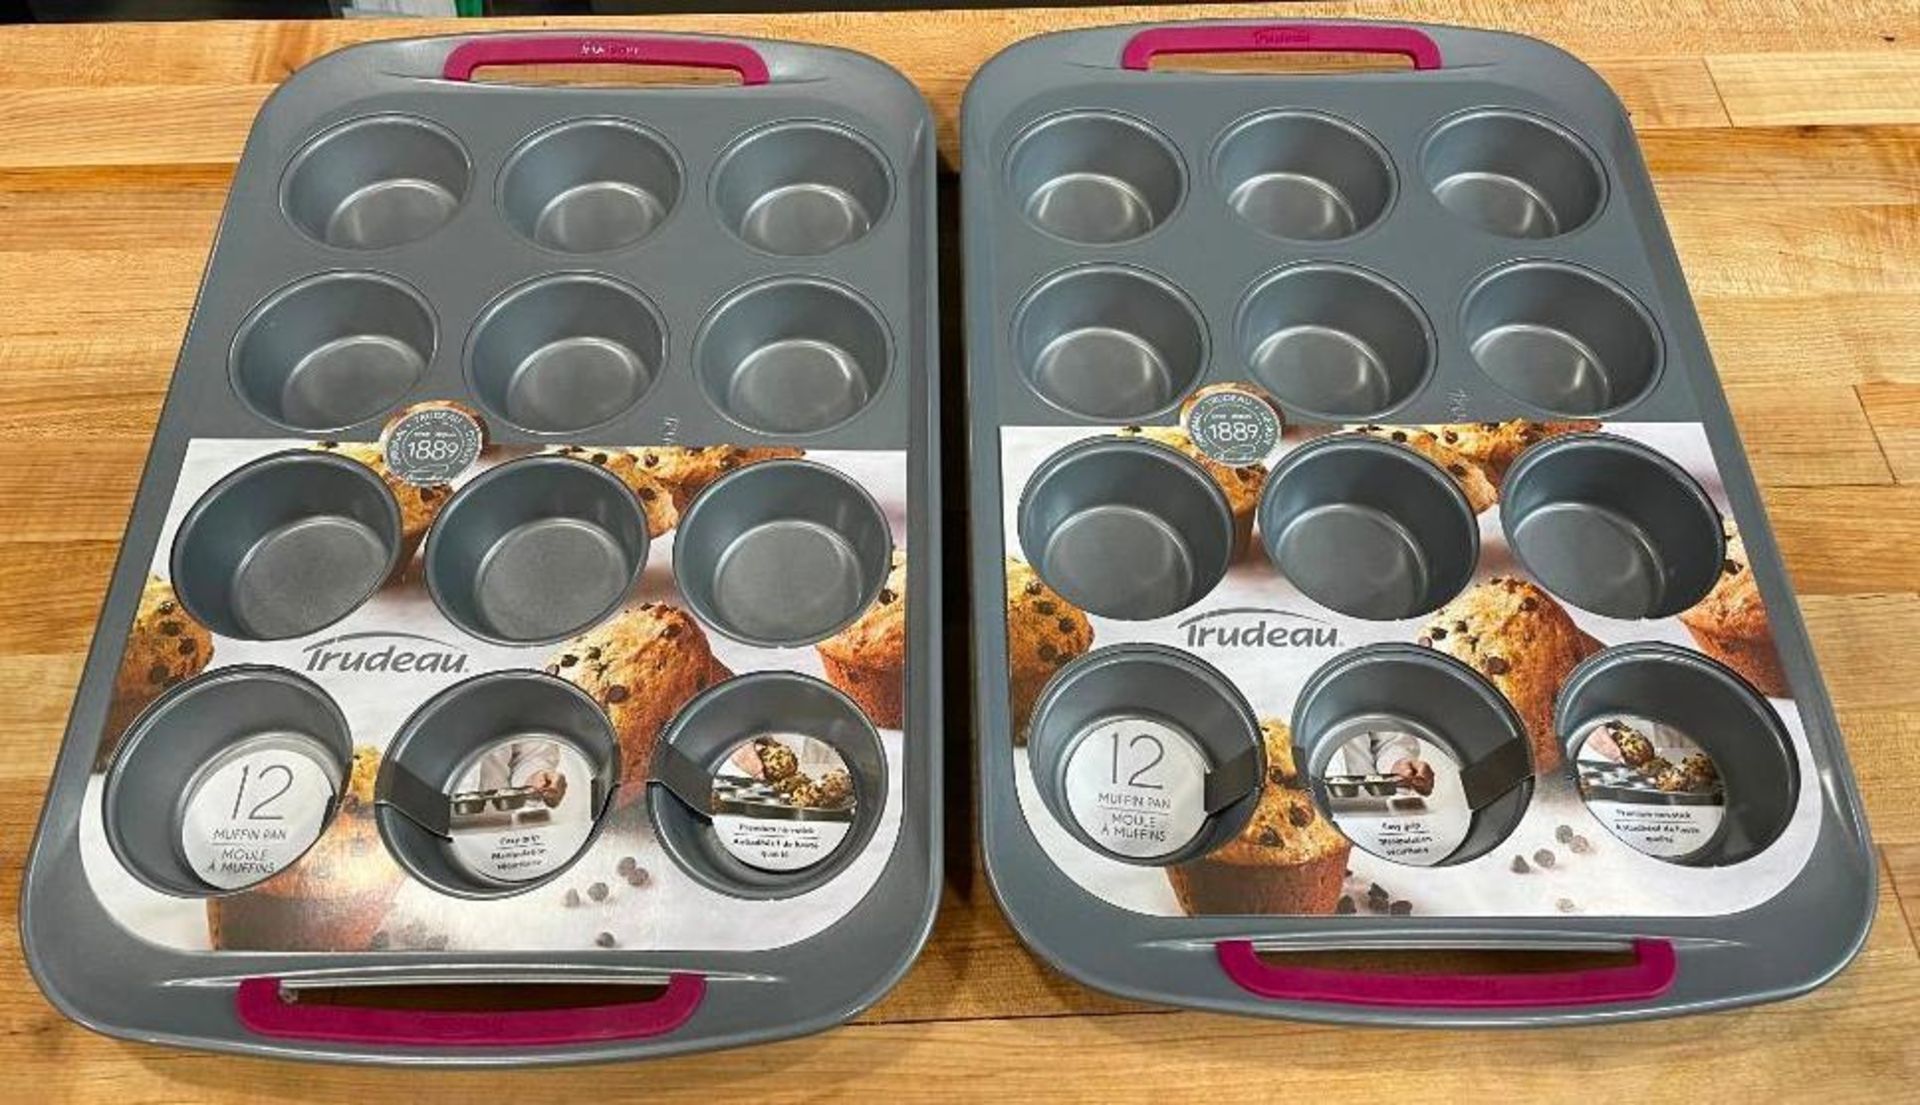 TRUDEAU 12 MUFFIN PANS - LOT OF 2